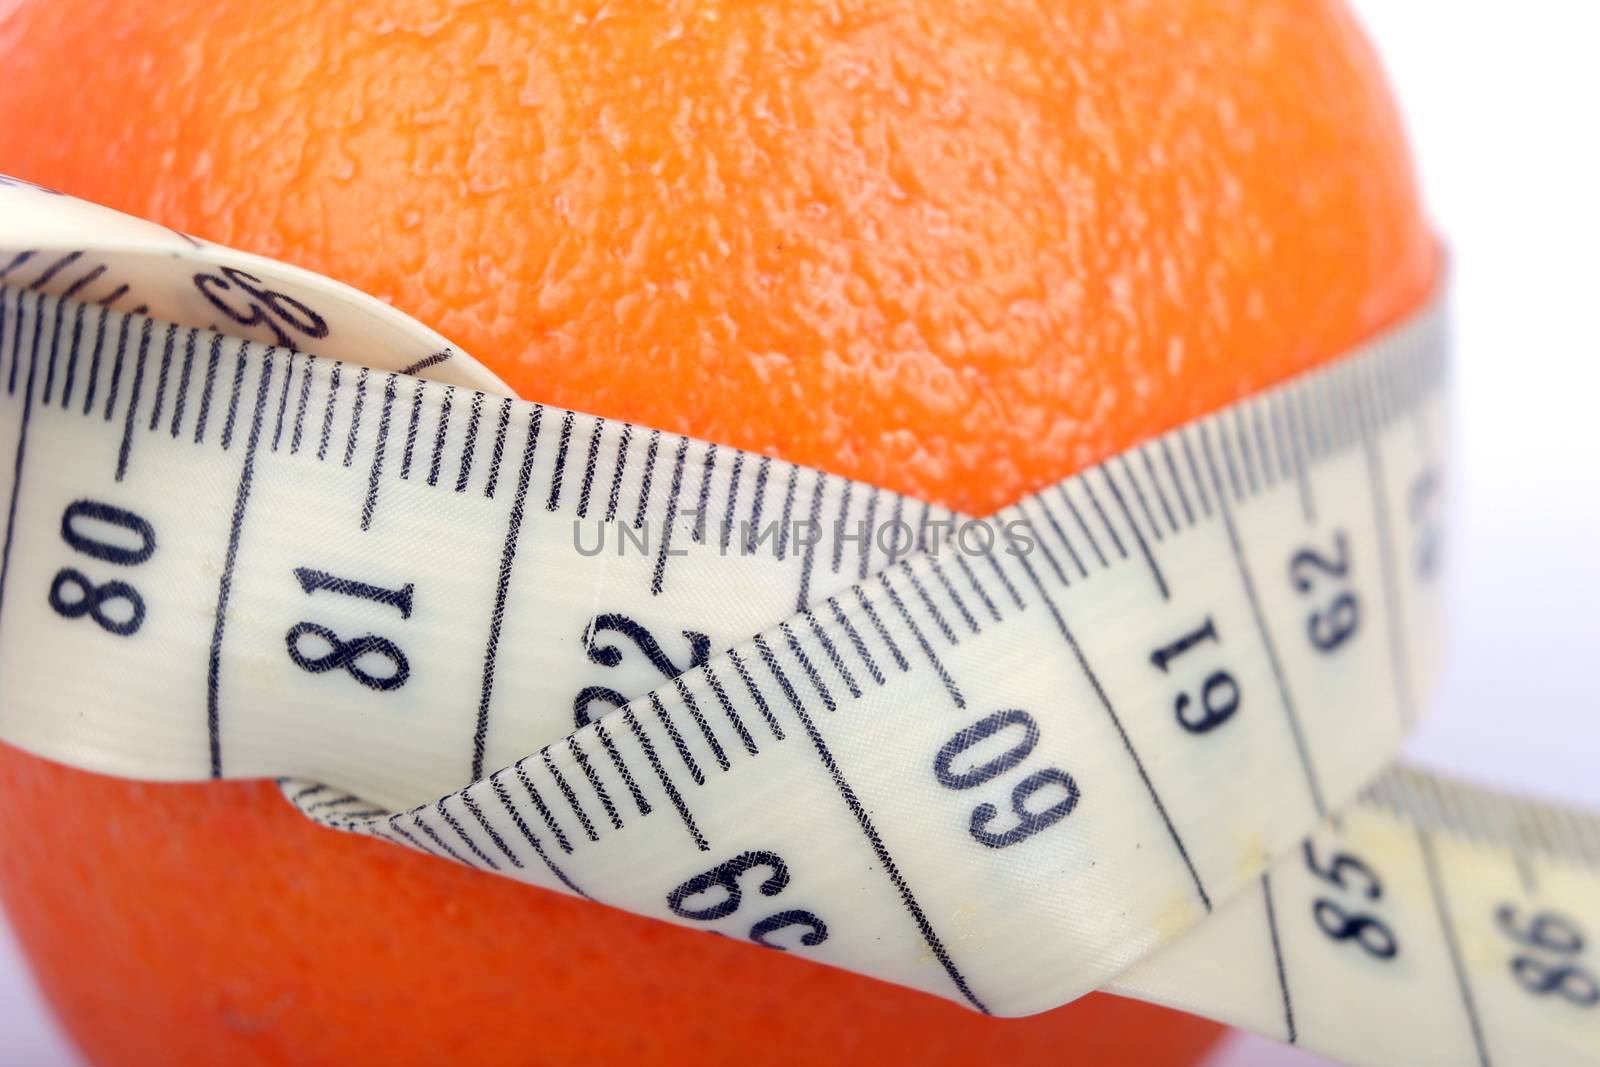 Supple orange with a tape measure - symbol of the fight against cellulite.